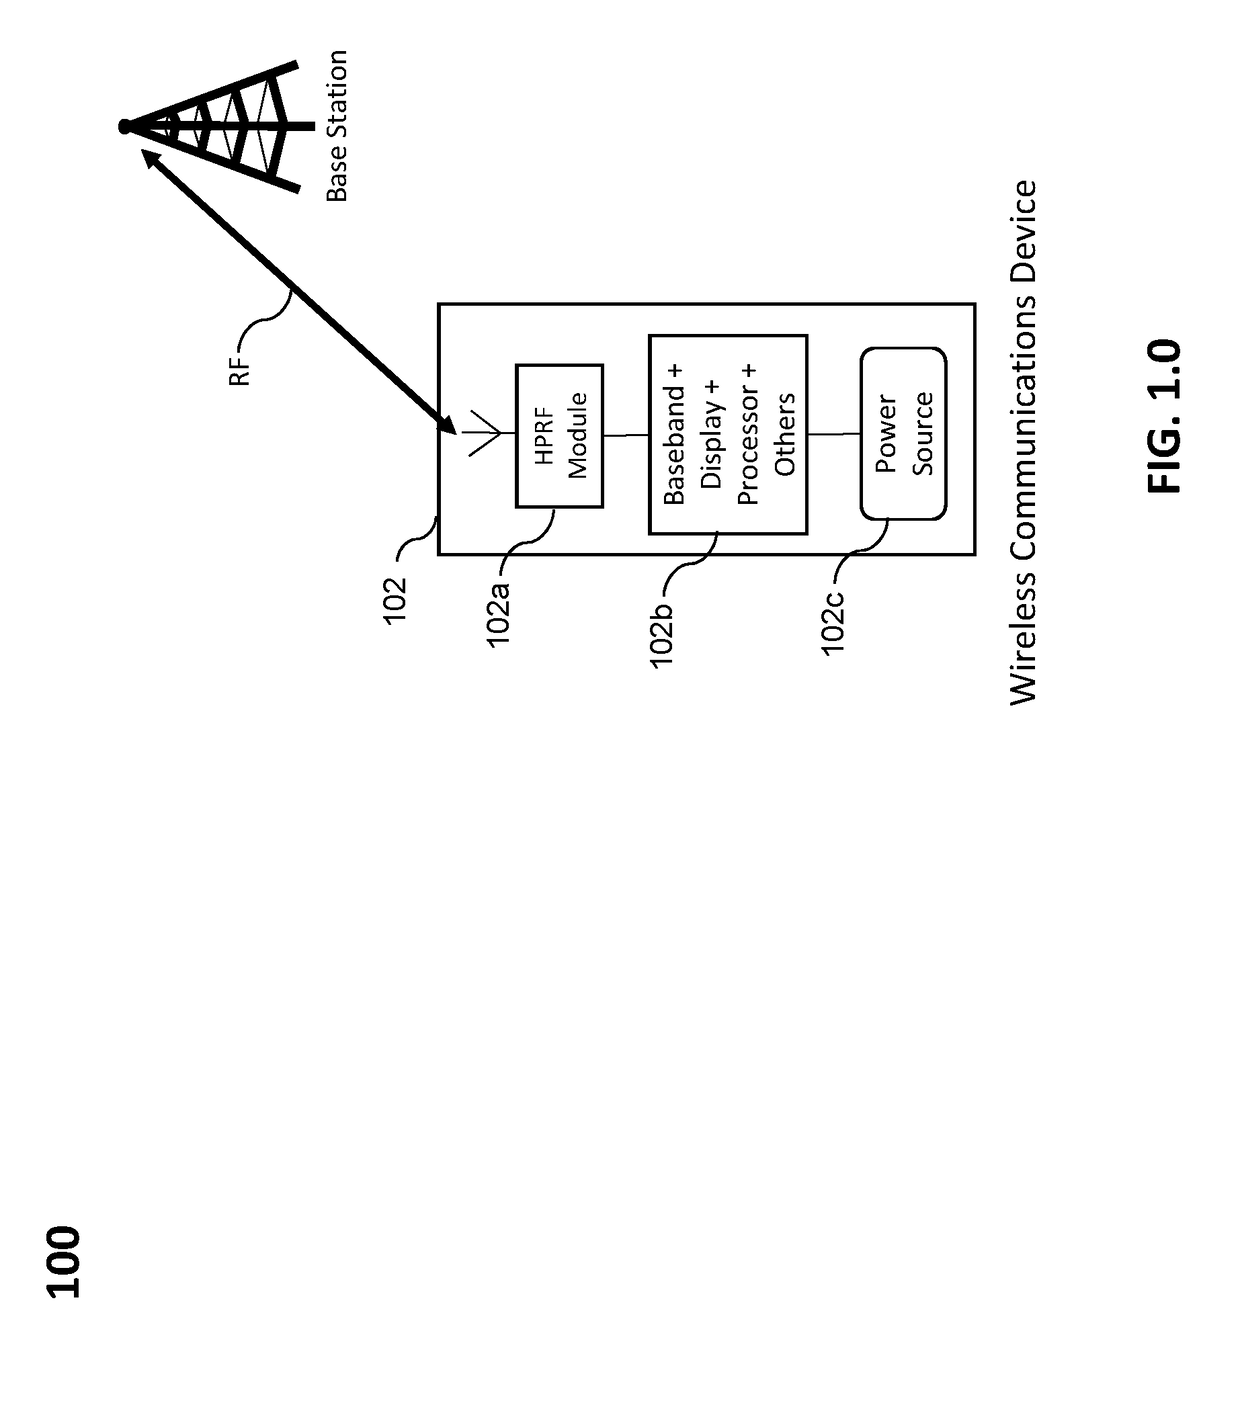 System and method for reducing exposure of human to radio frequency radiation